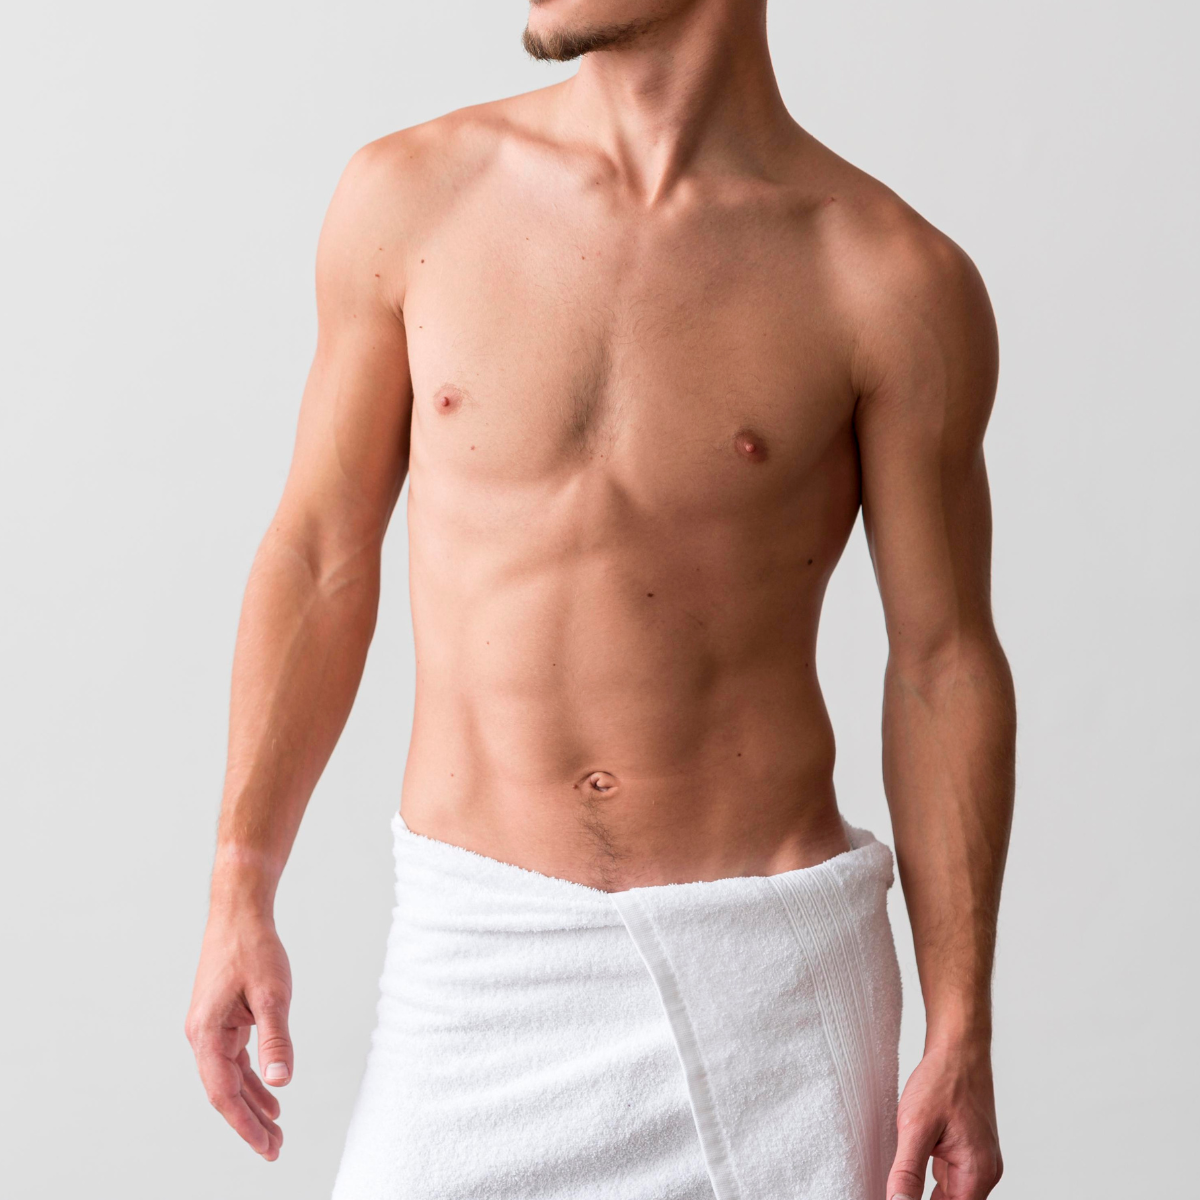 What's The Best Option to Remove Chest Hair? - Uncover